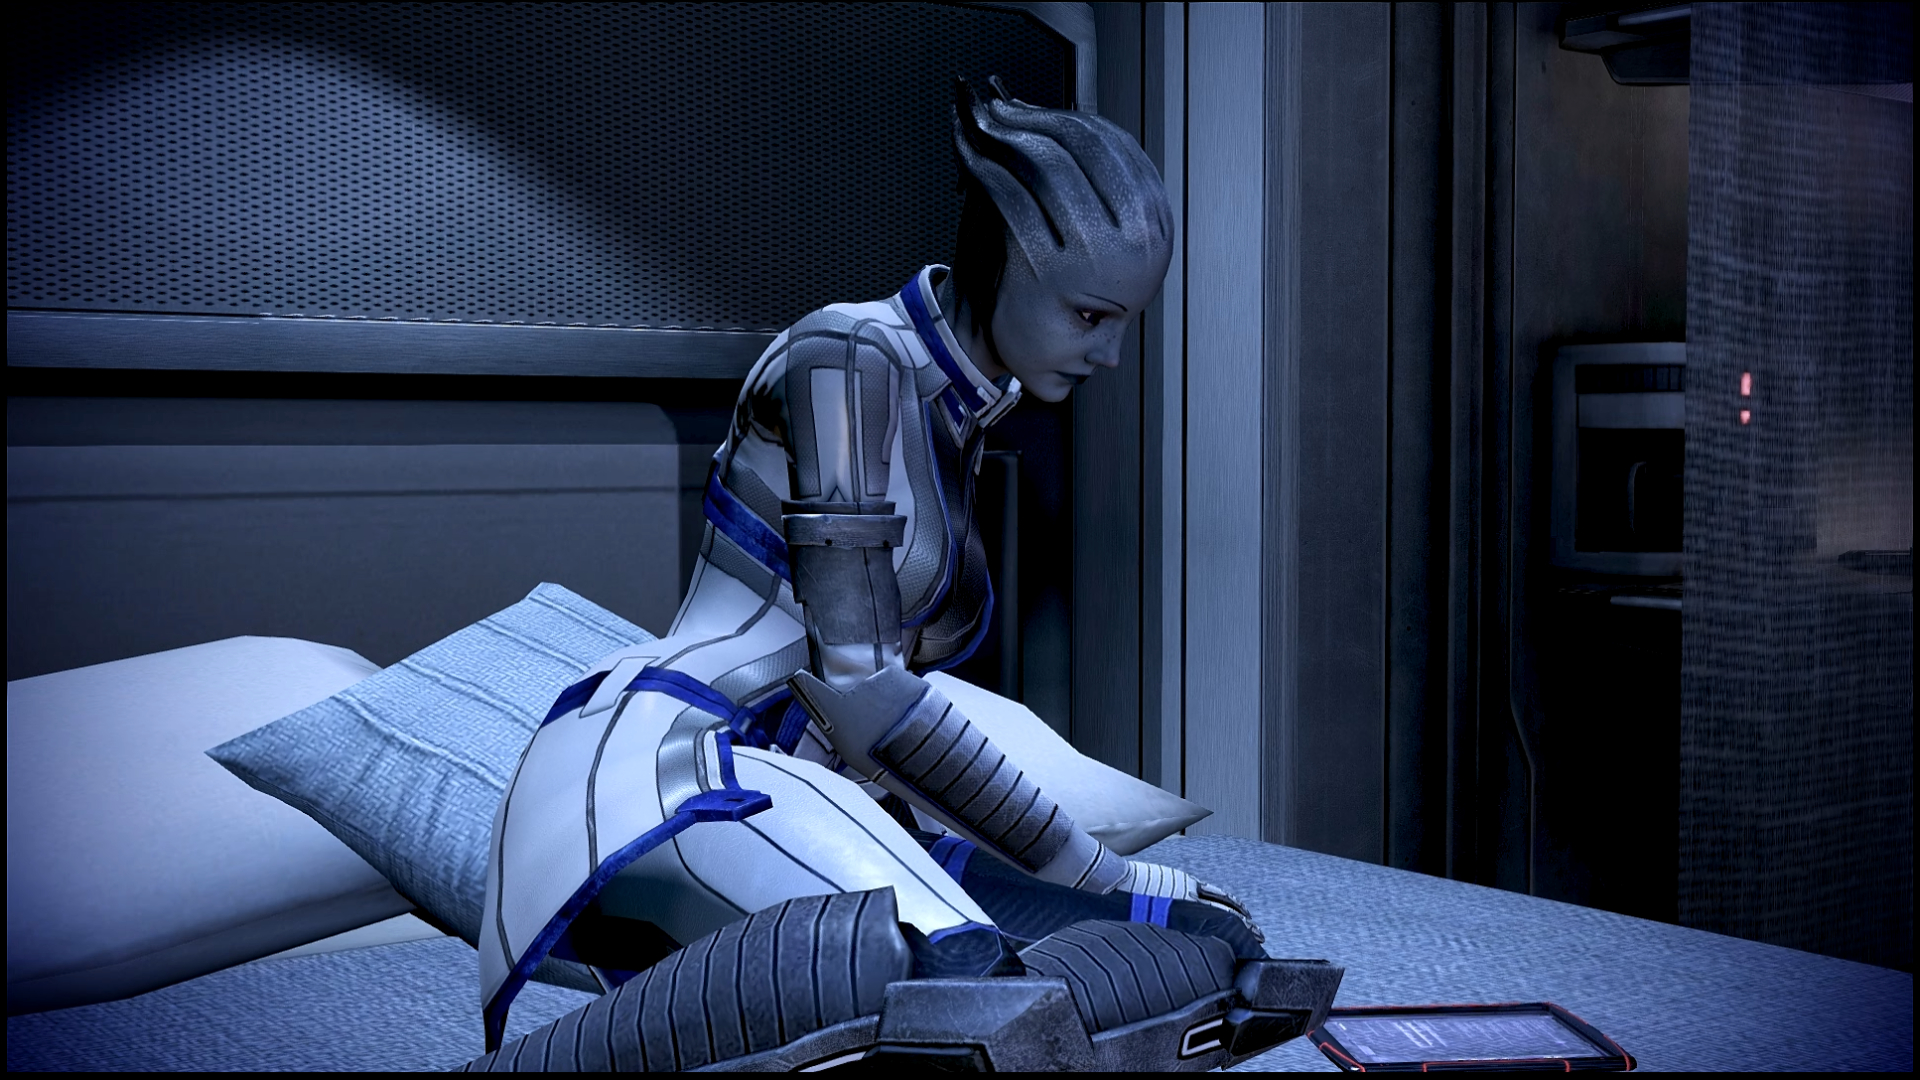 Mass Effect 3 Liara Studying Dreamscene By Droot1986 On Deviantart